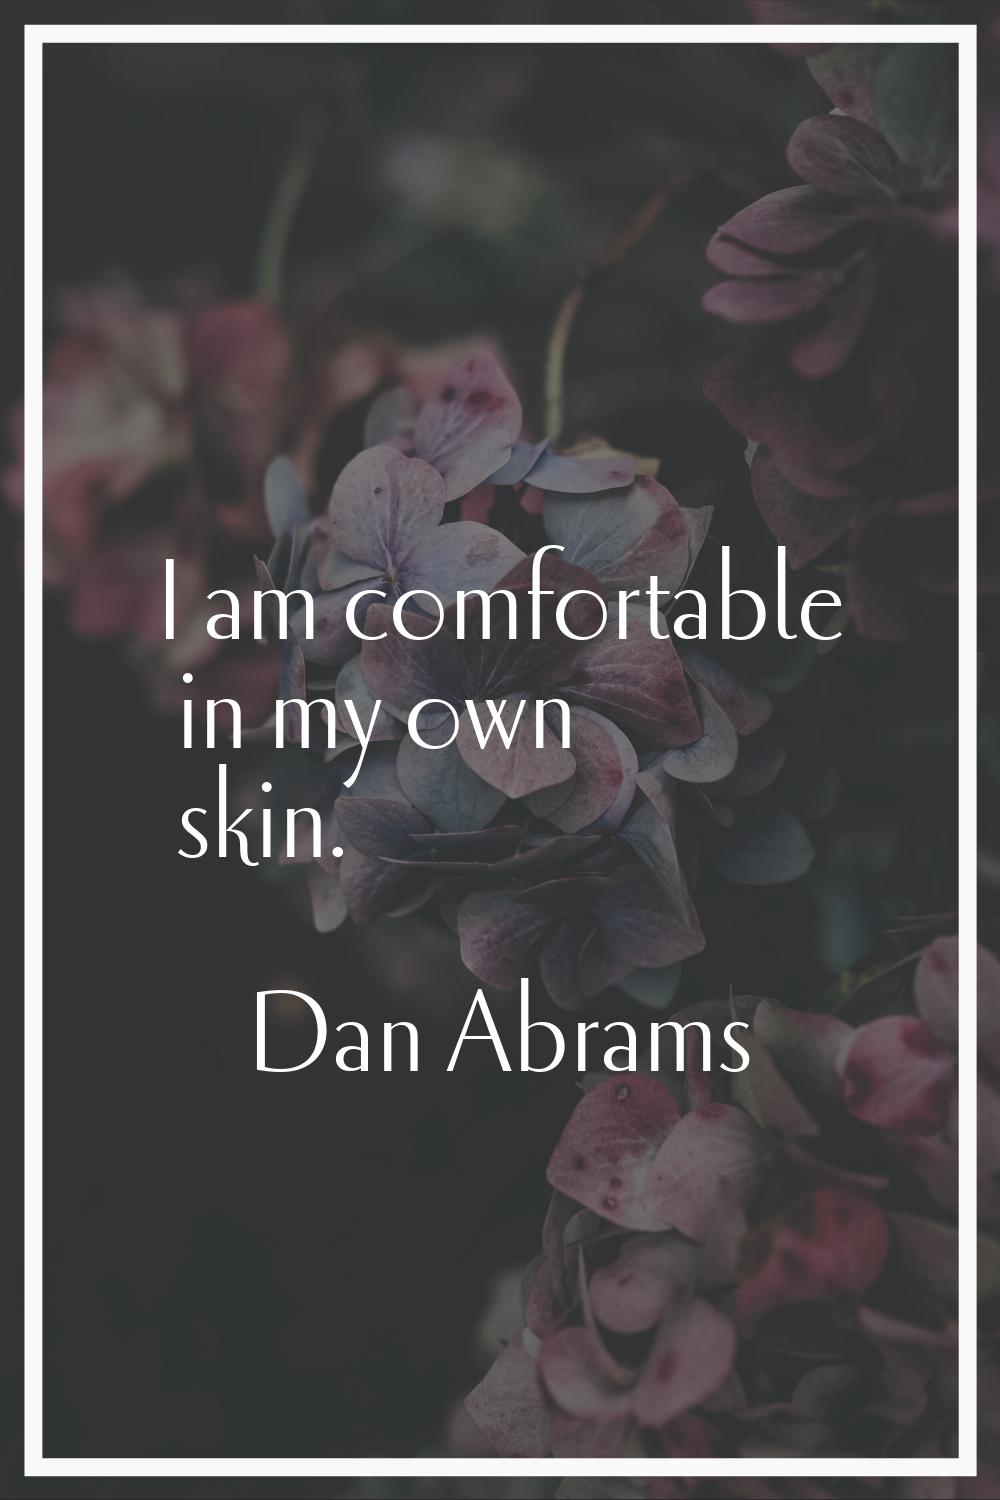 I am comfortable in my own skin.